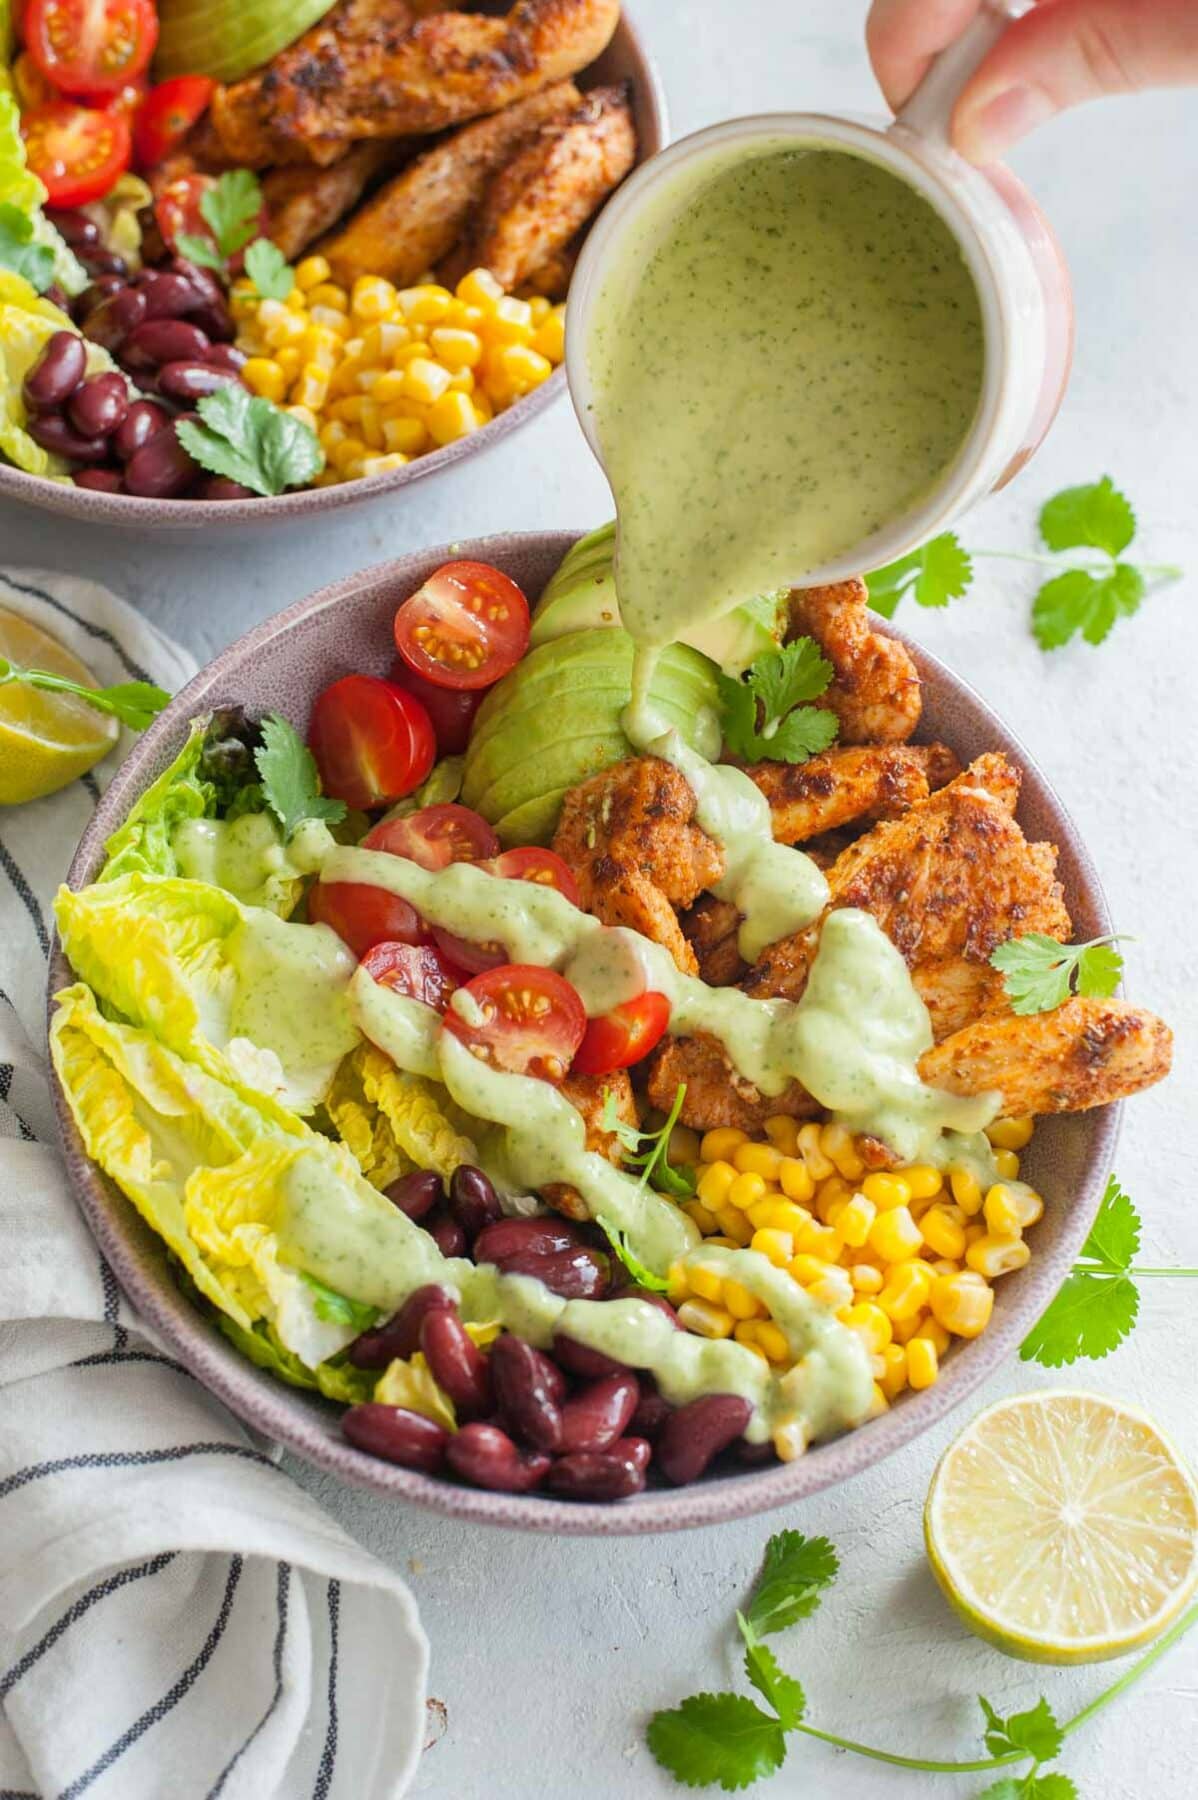 Avocado cilantro lime dressing is being poured over southwest chicken salad.